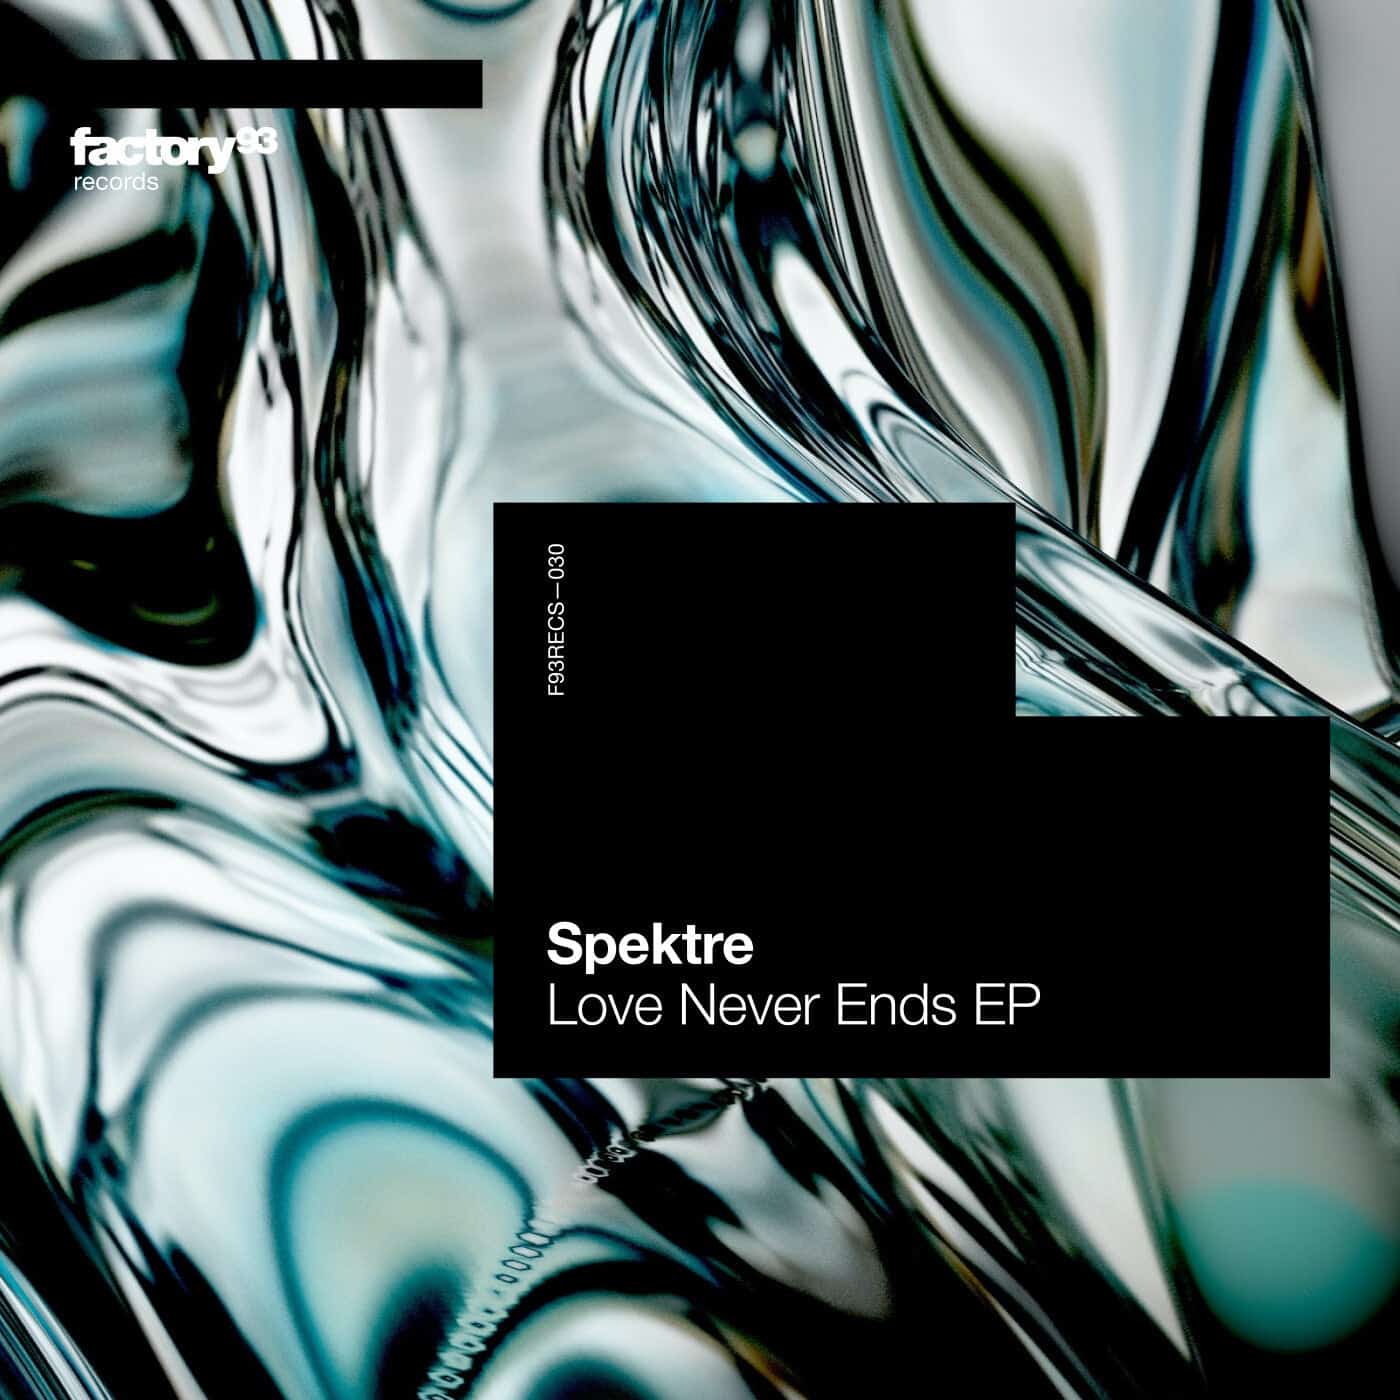 Download Spektre - Love Never Ends EP on Electrobuzz